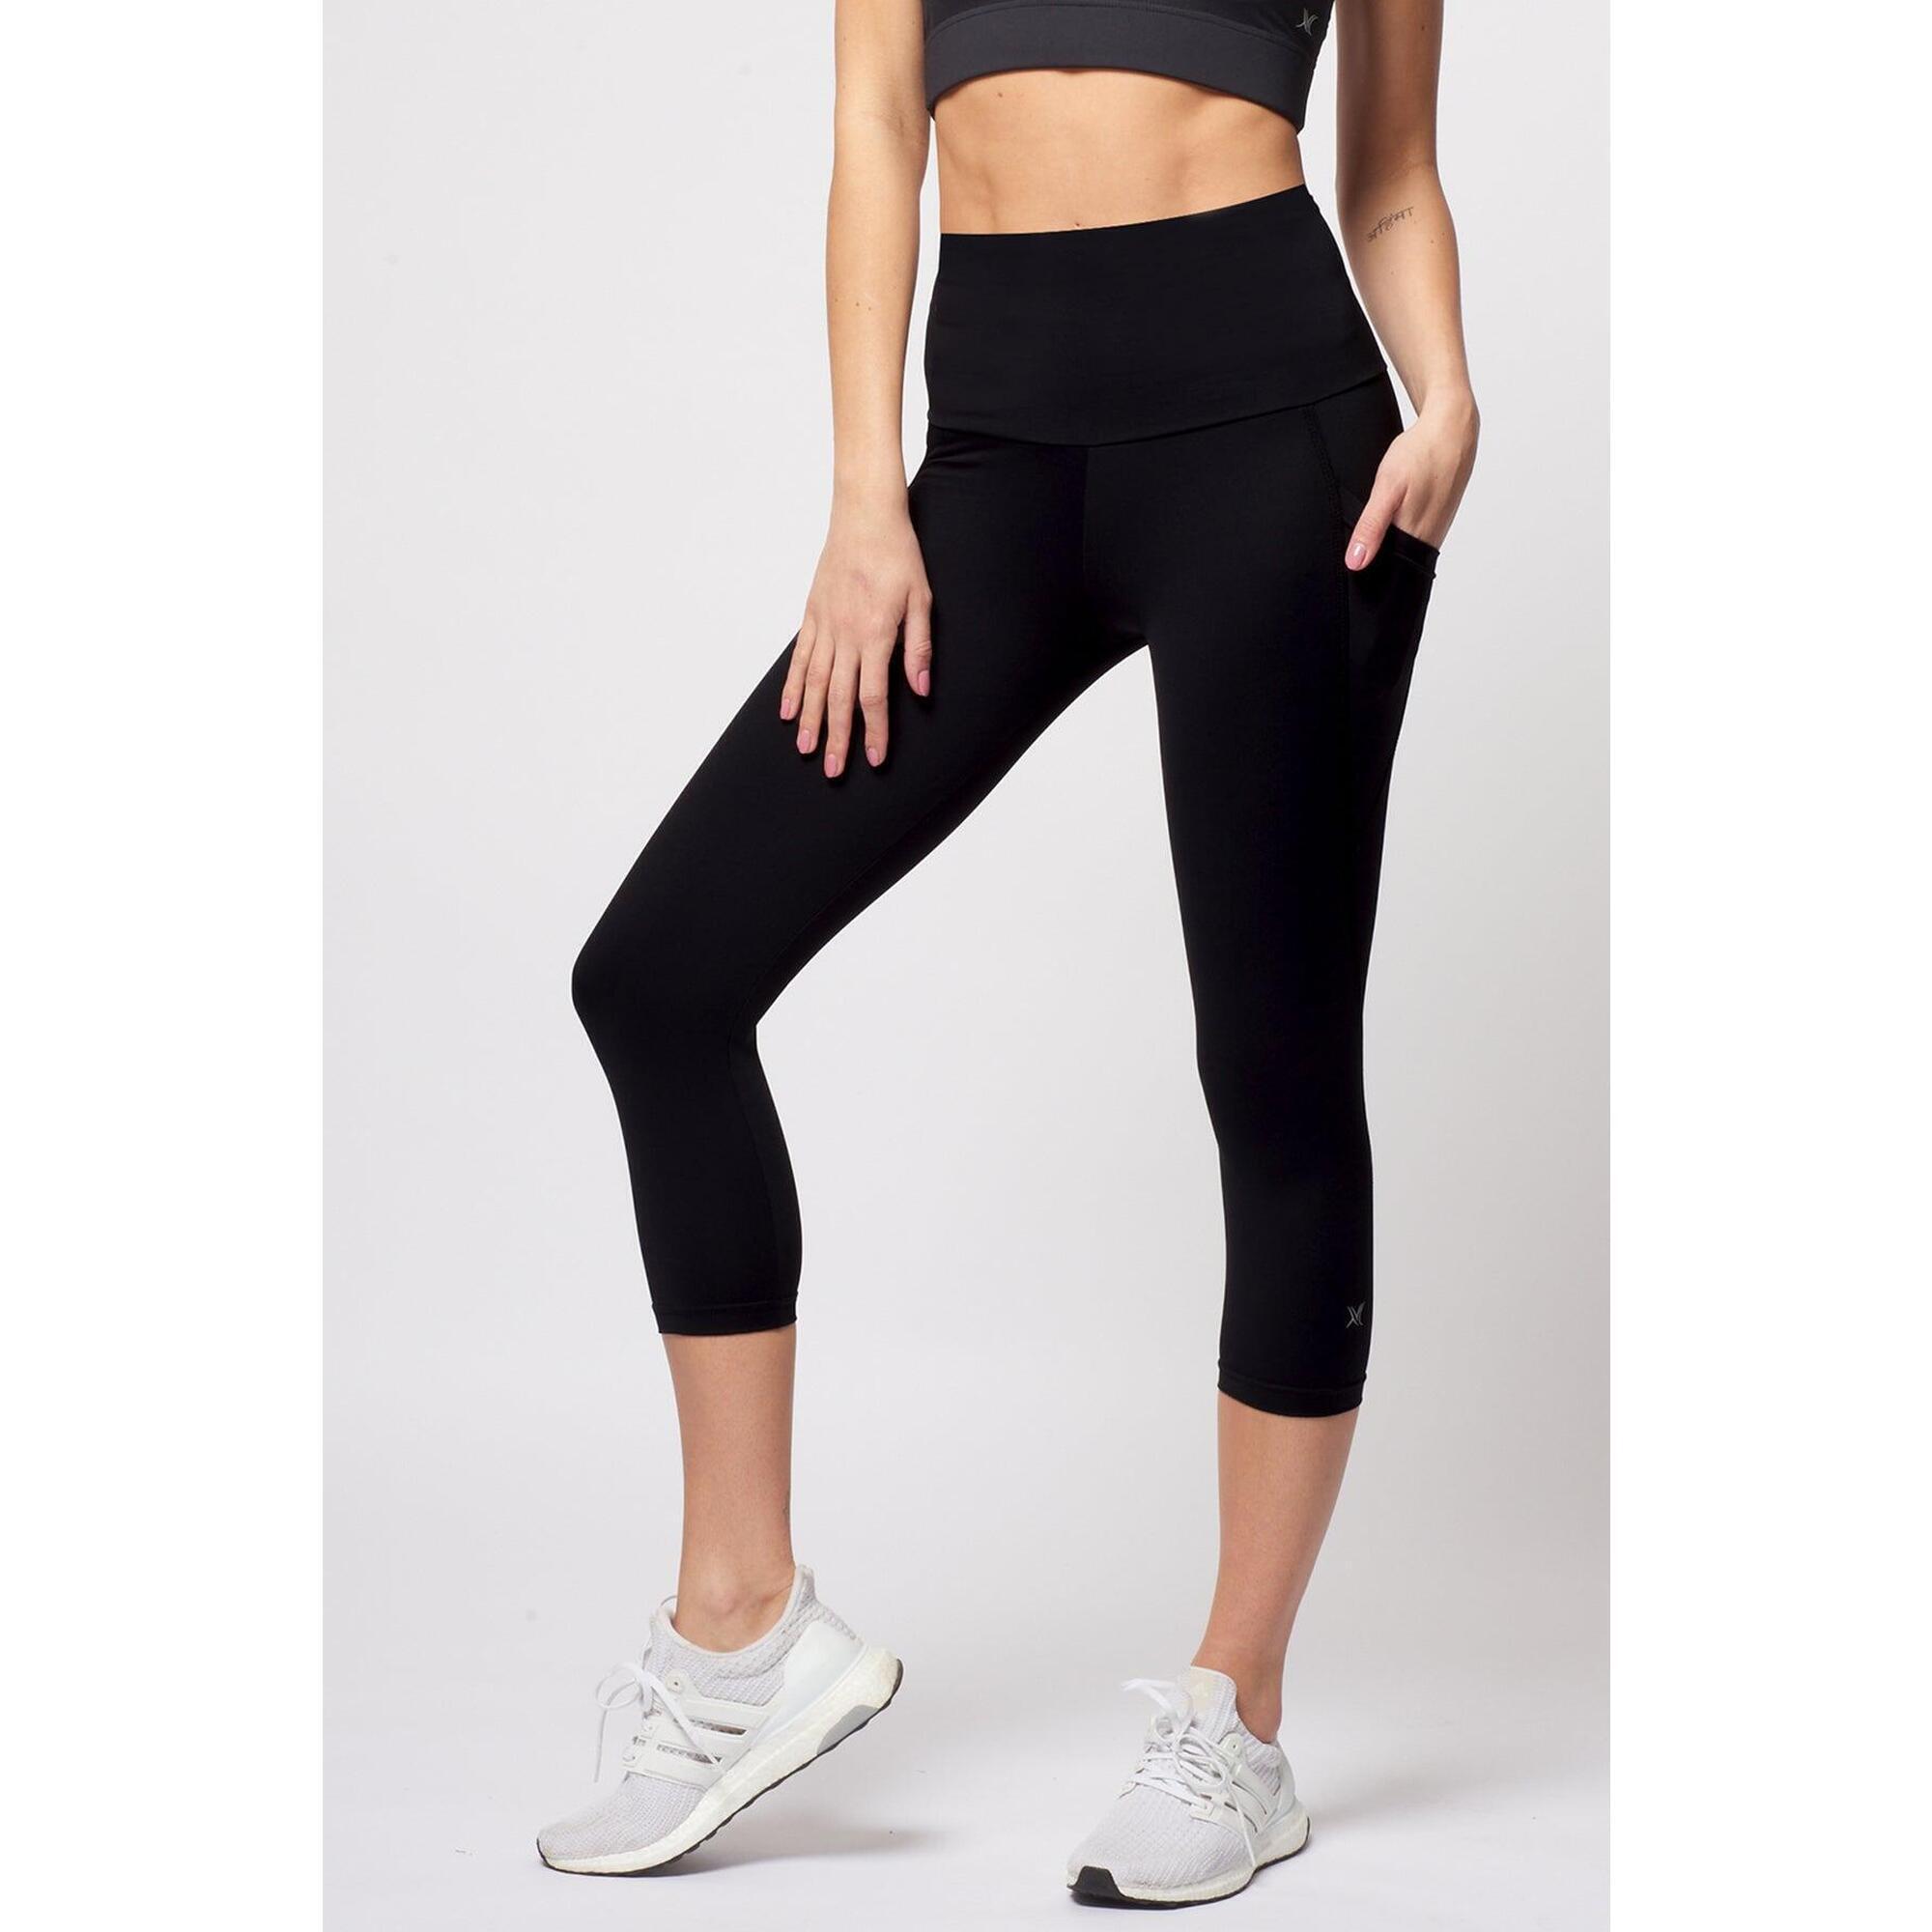 TLC SPORT Extra Compression Cropped Leggings with Tummy Control and Side Pockets Black